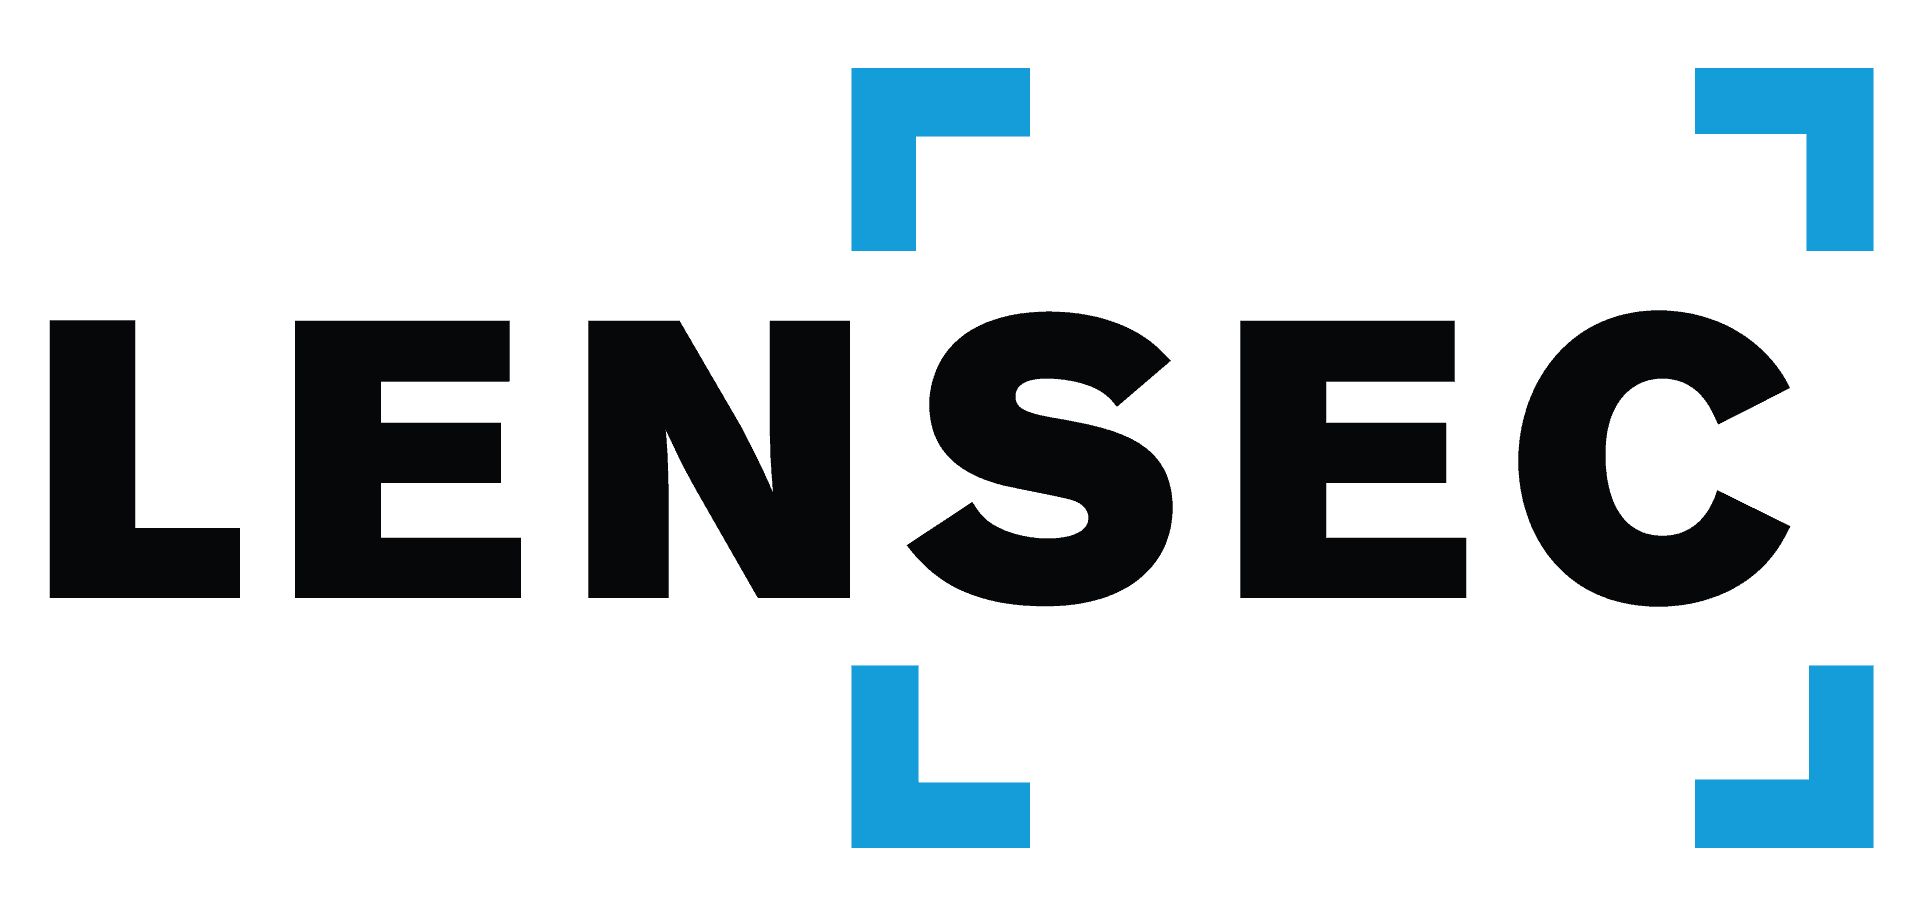 LENSEC - The Power of Perspective